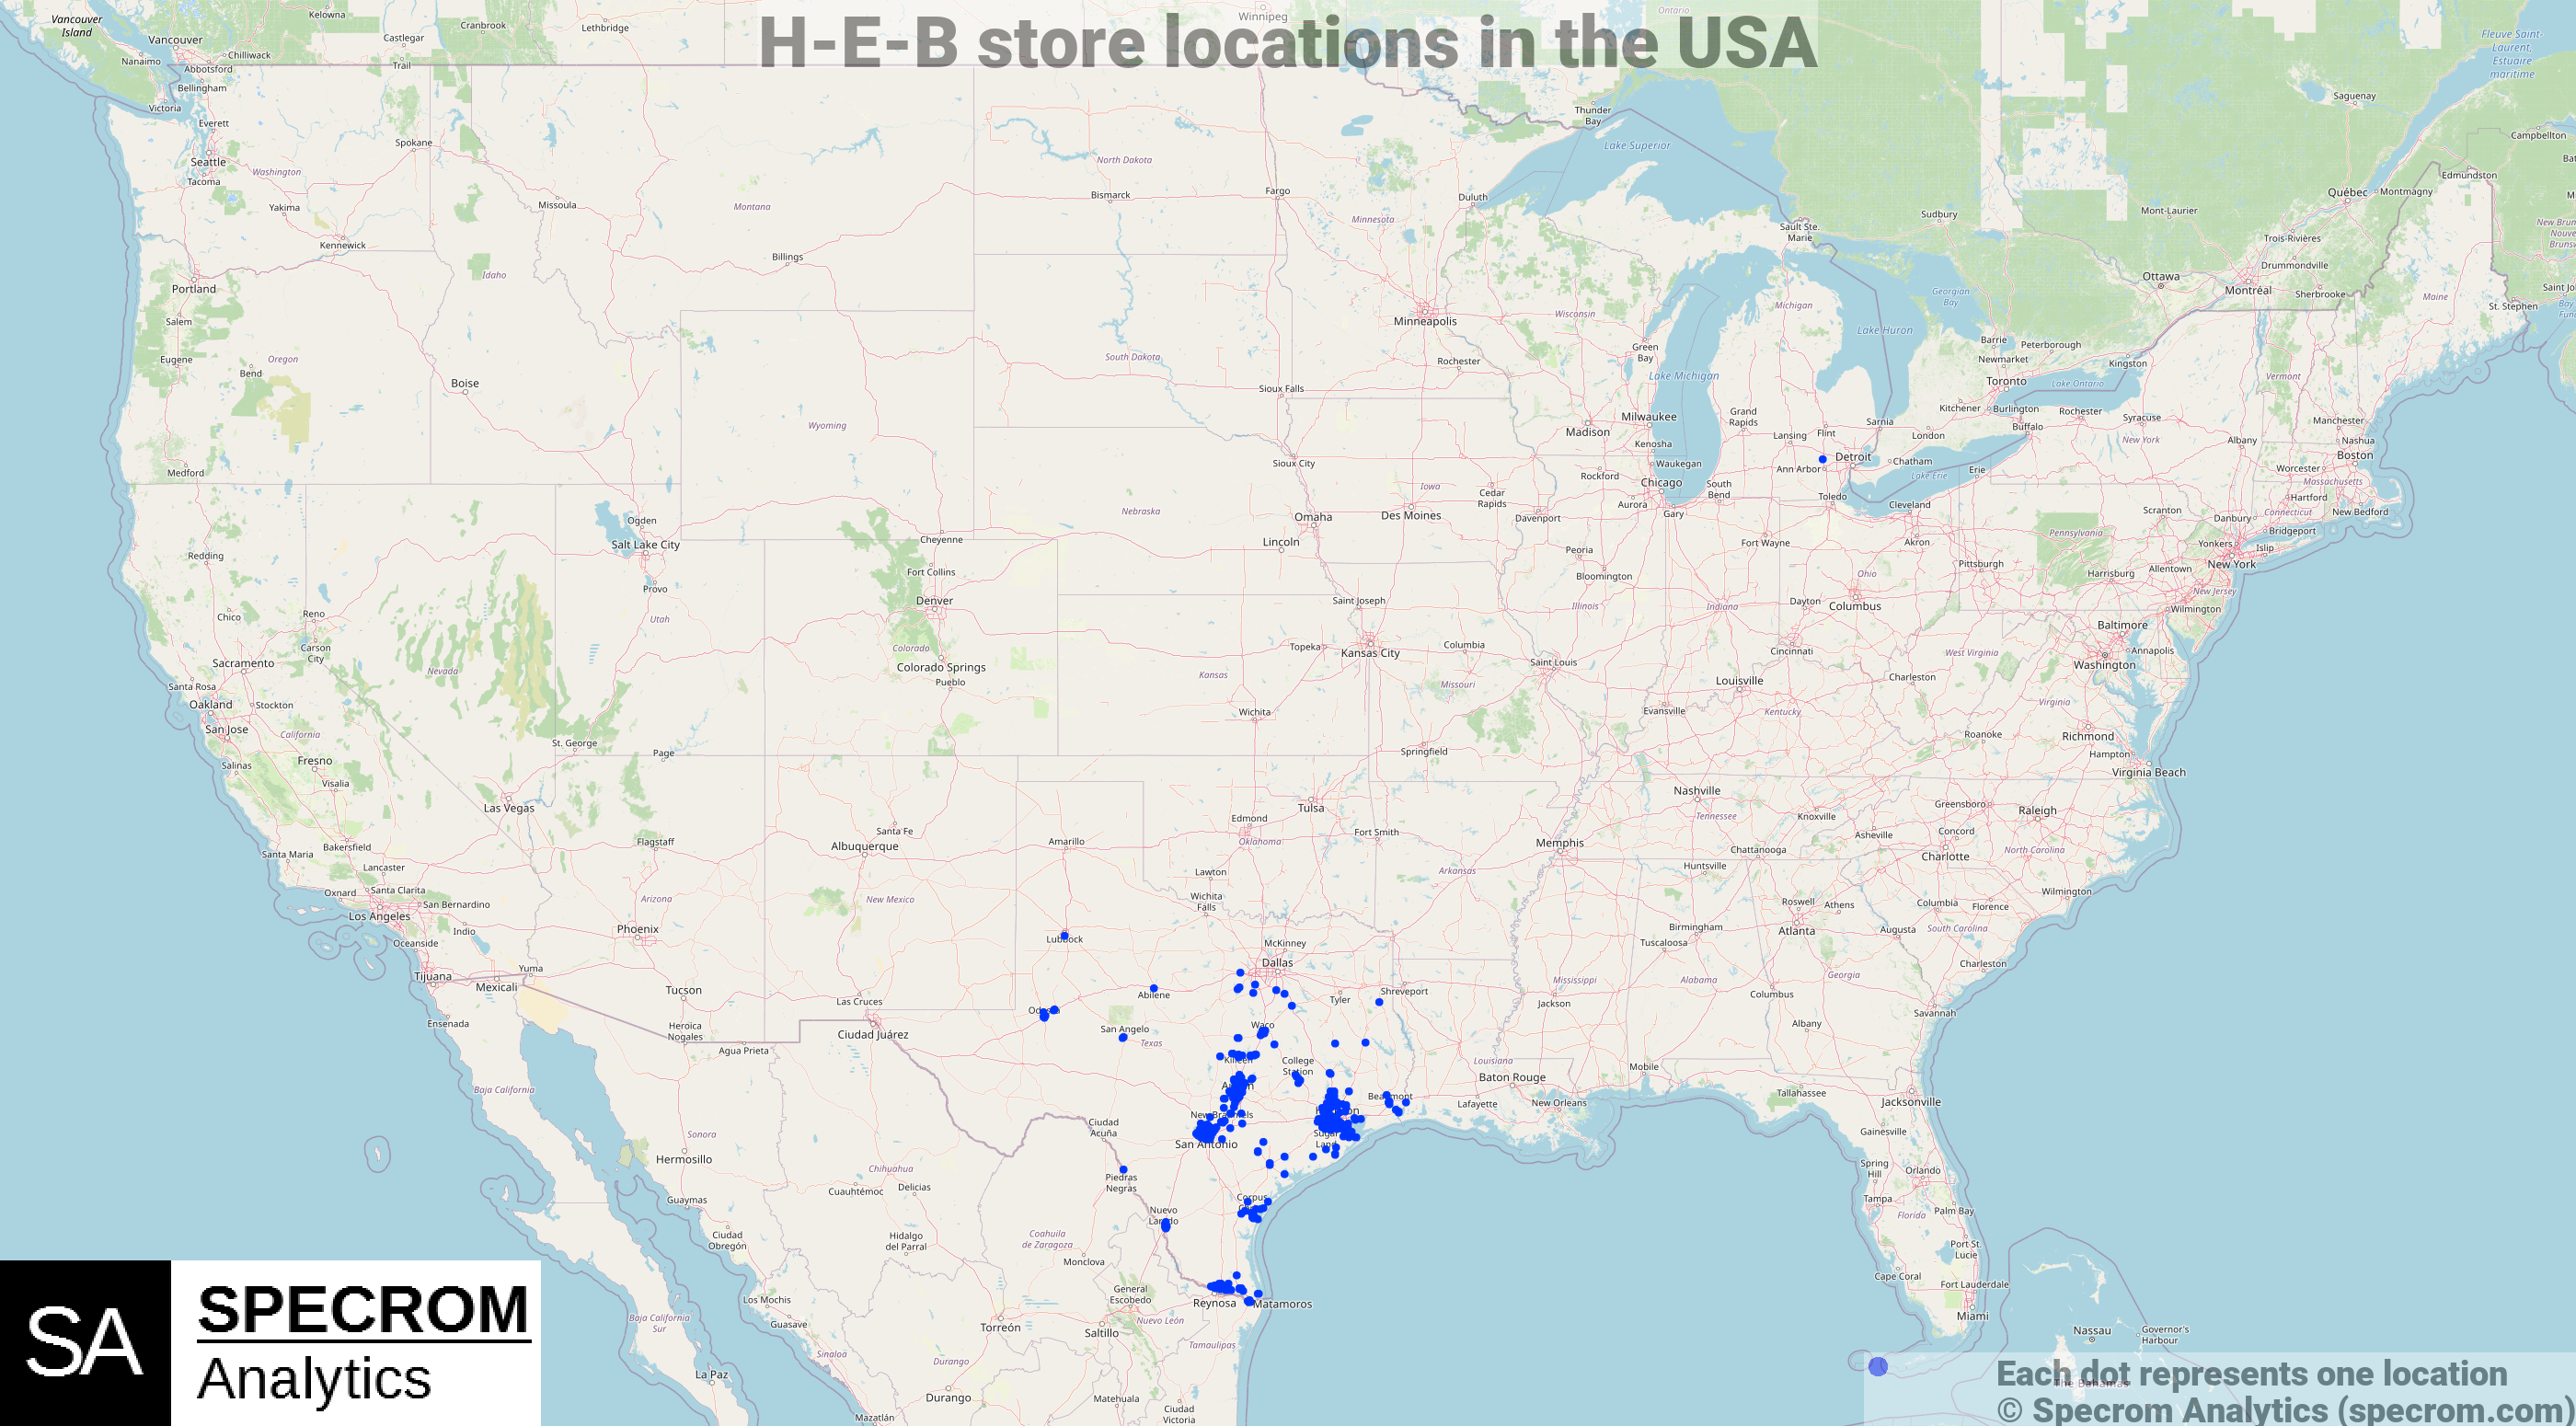 H-E-B store locations in the USA